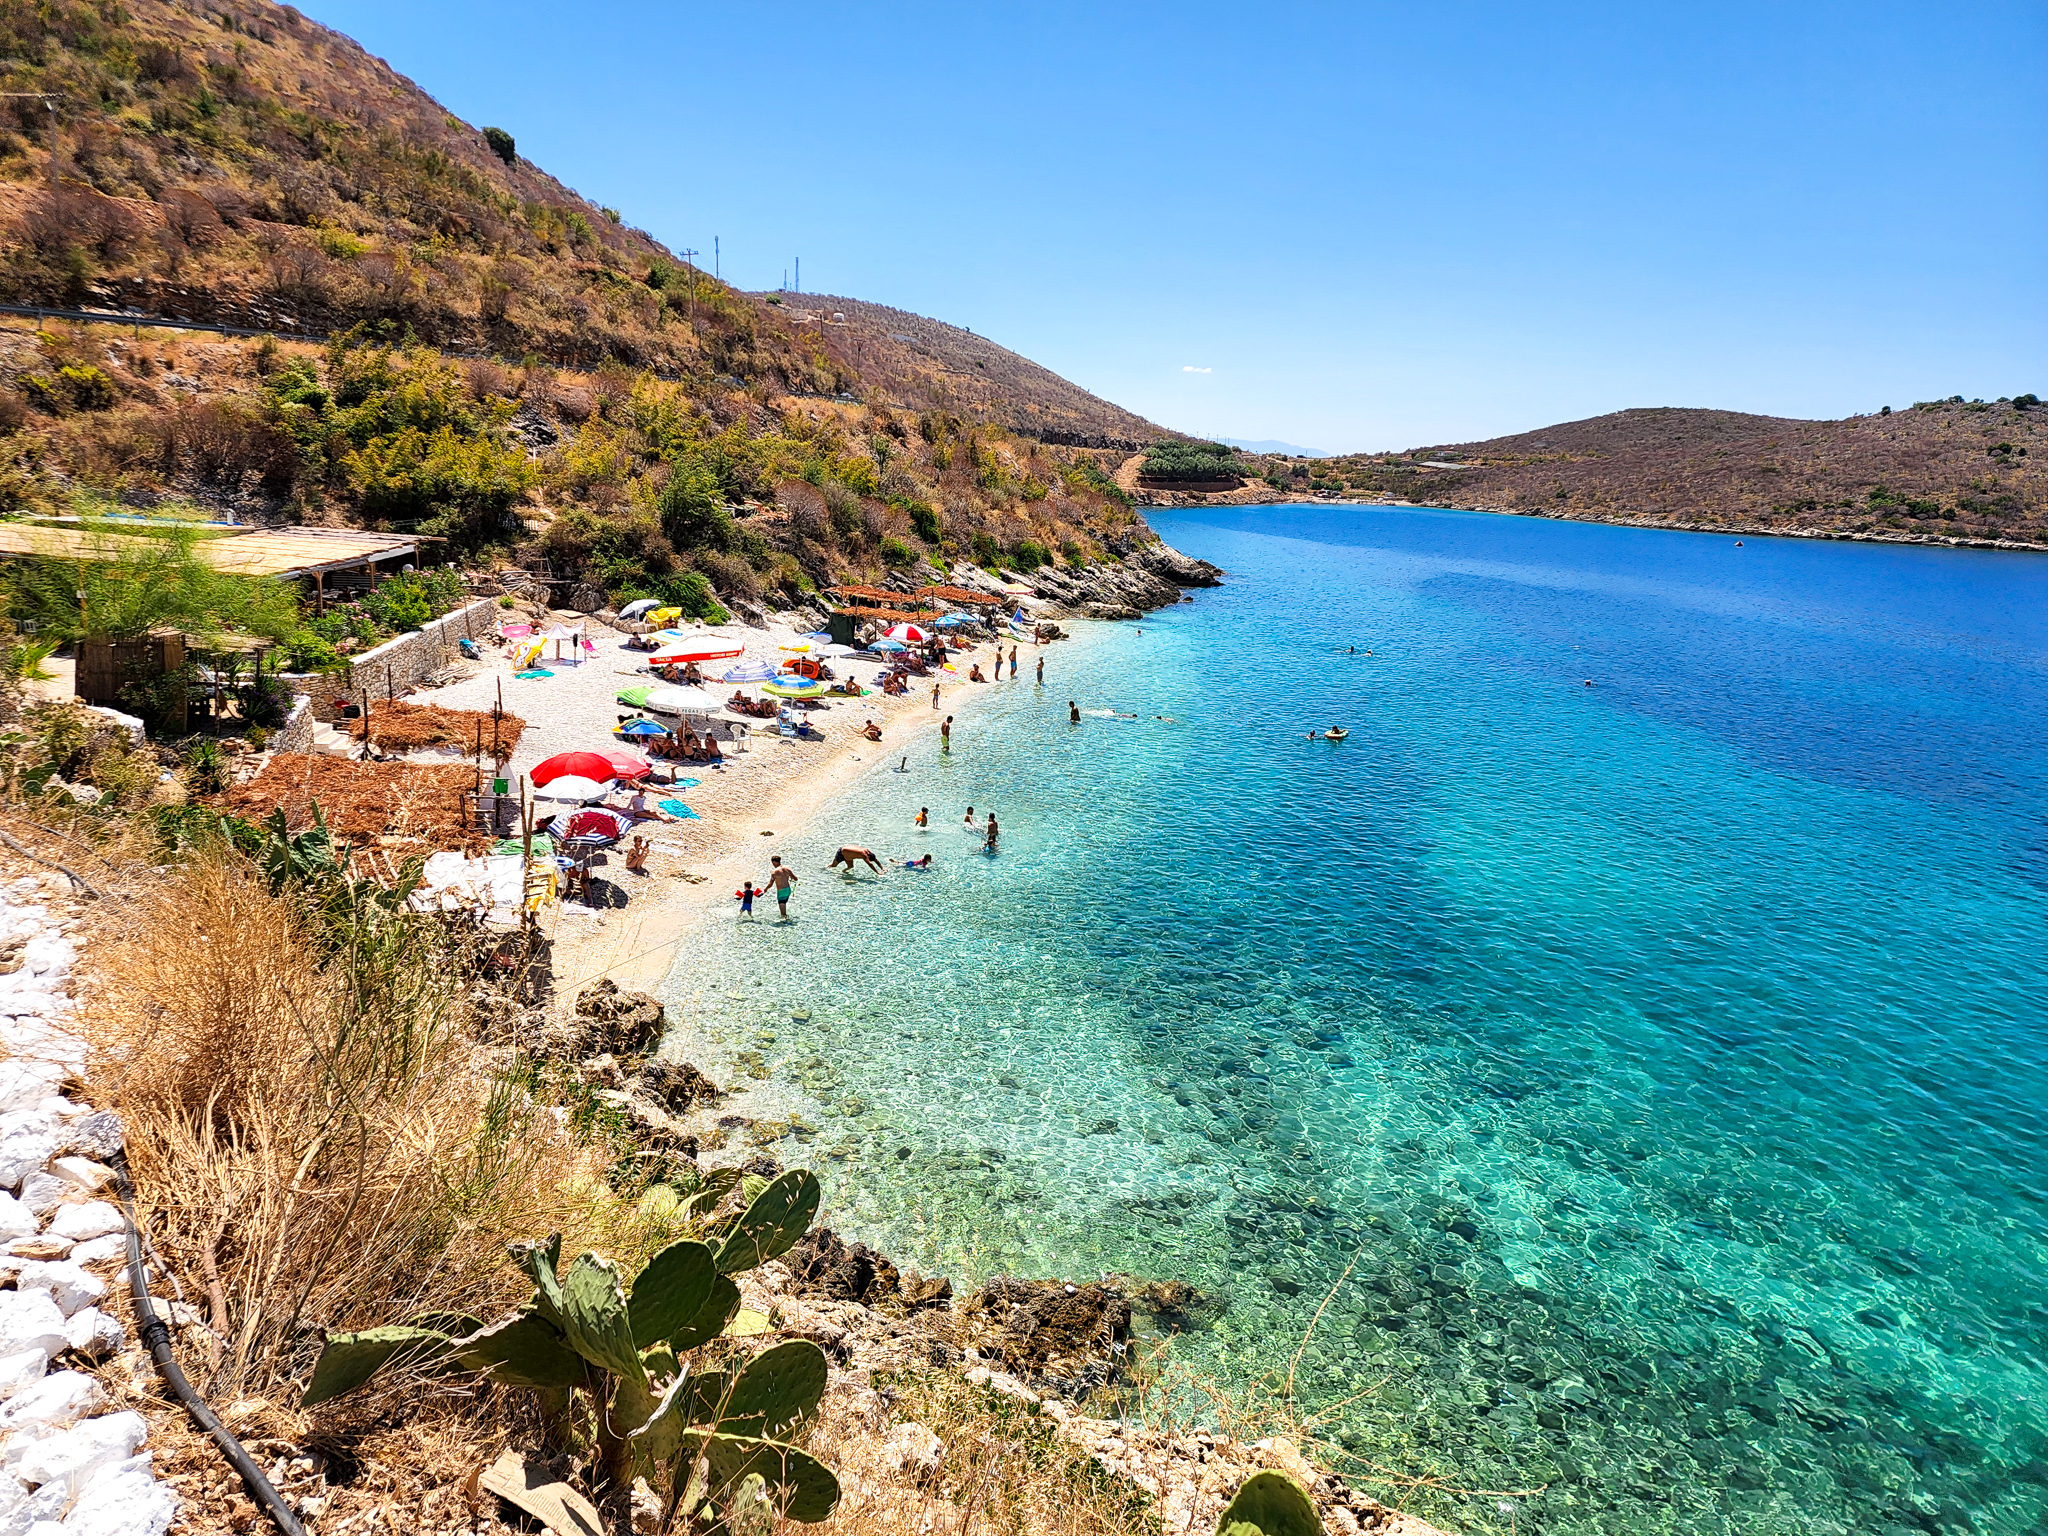 The Albanian Riviera might be Europe's best kept secret - 2 Cups